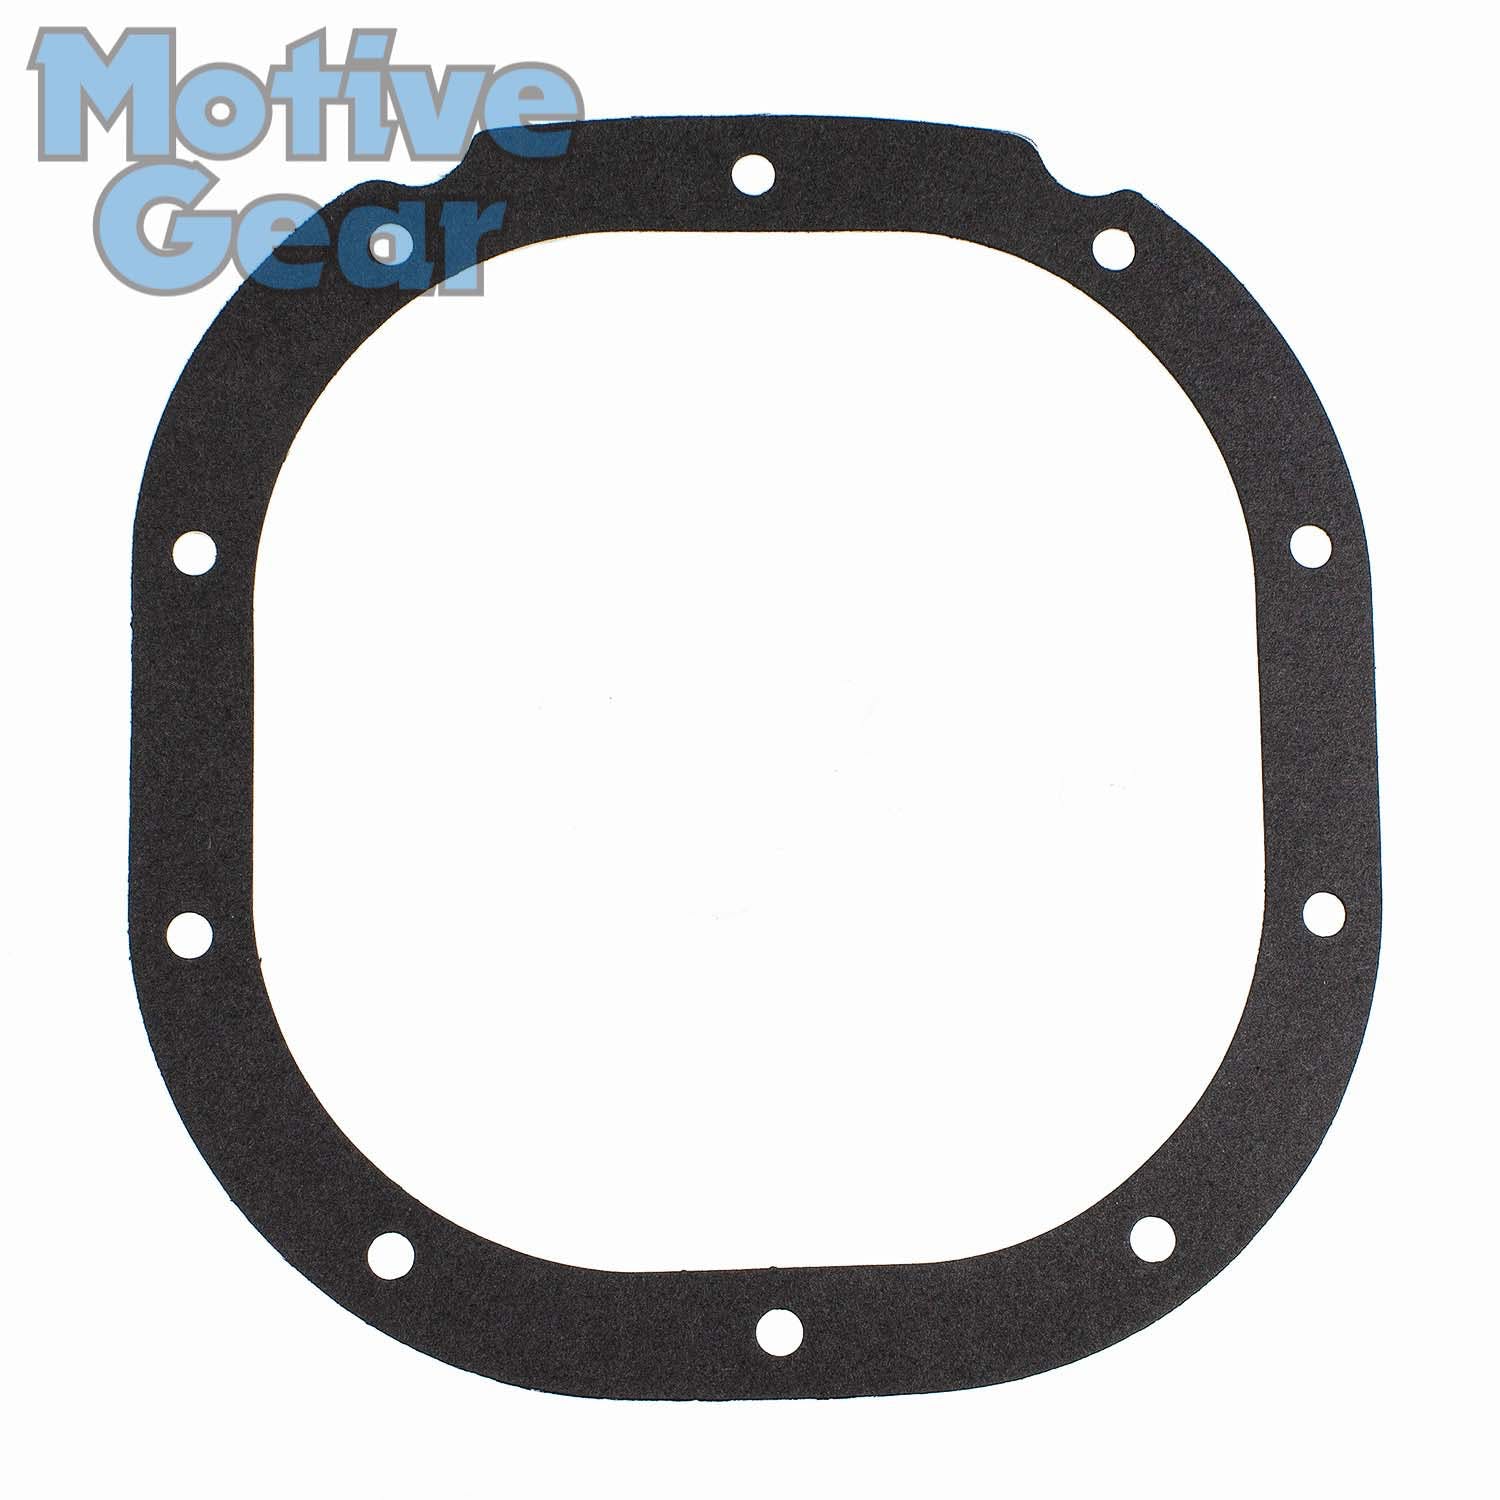 Motive Gear 5122 Differential Cover Gasket